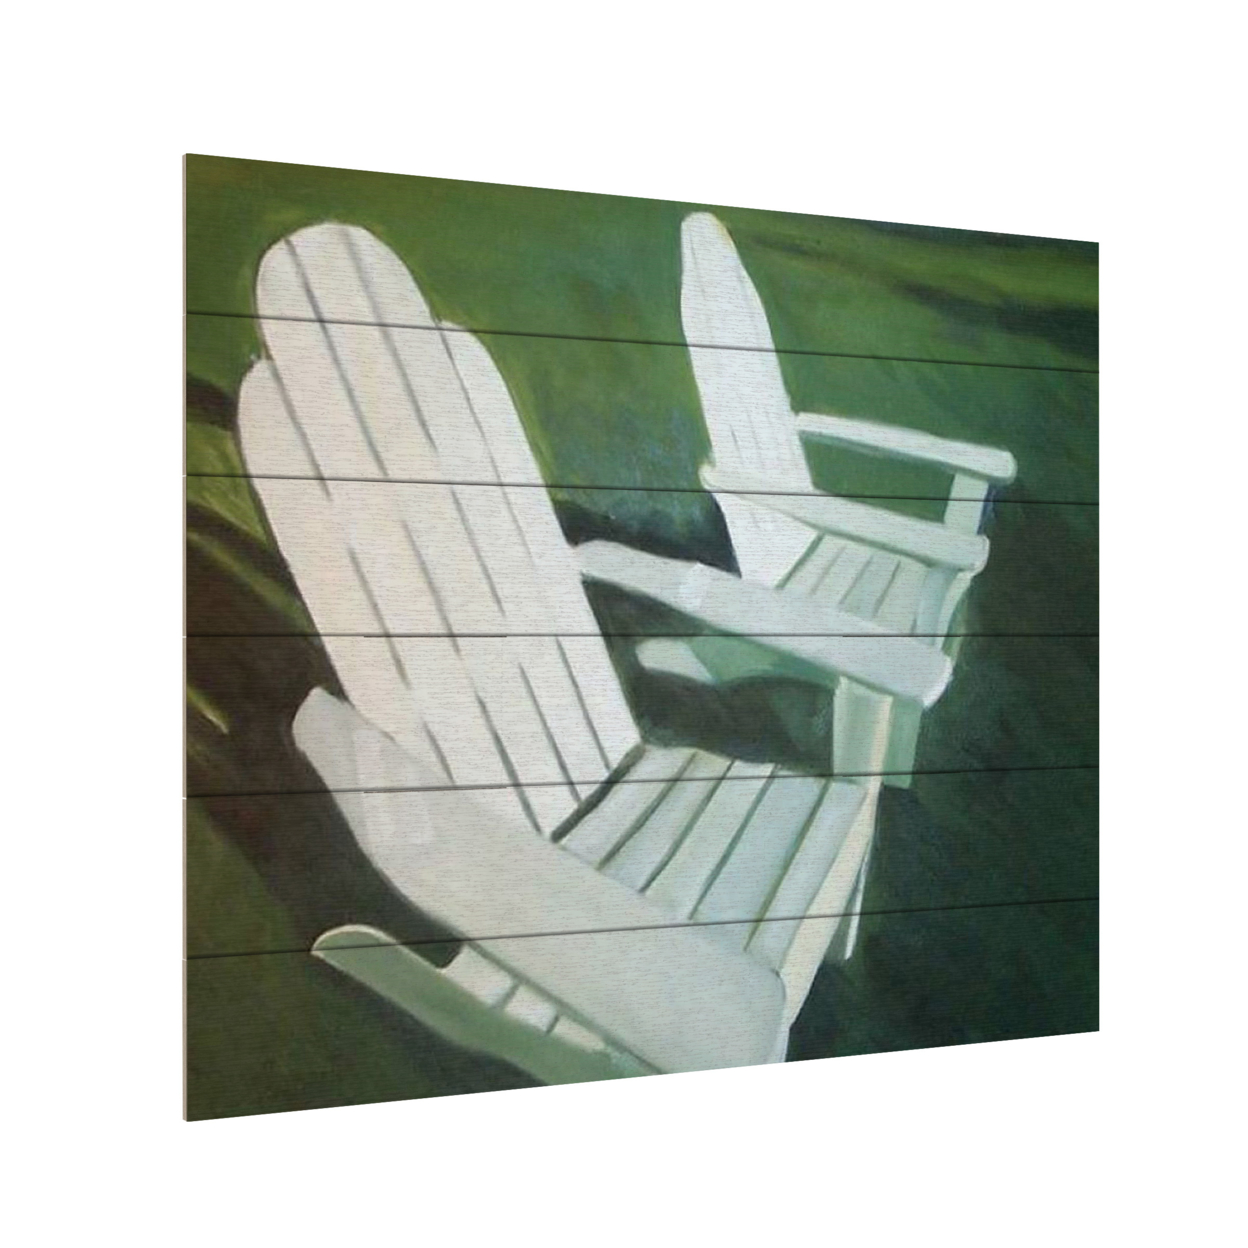 Wooden Slat Art 18 X 22 Inches Titled Lawn Chairs Ready To Hang Home Decor Picture